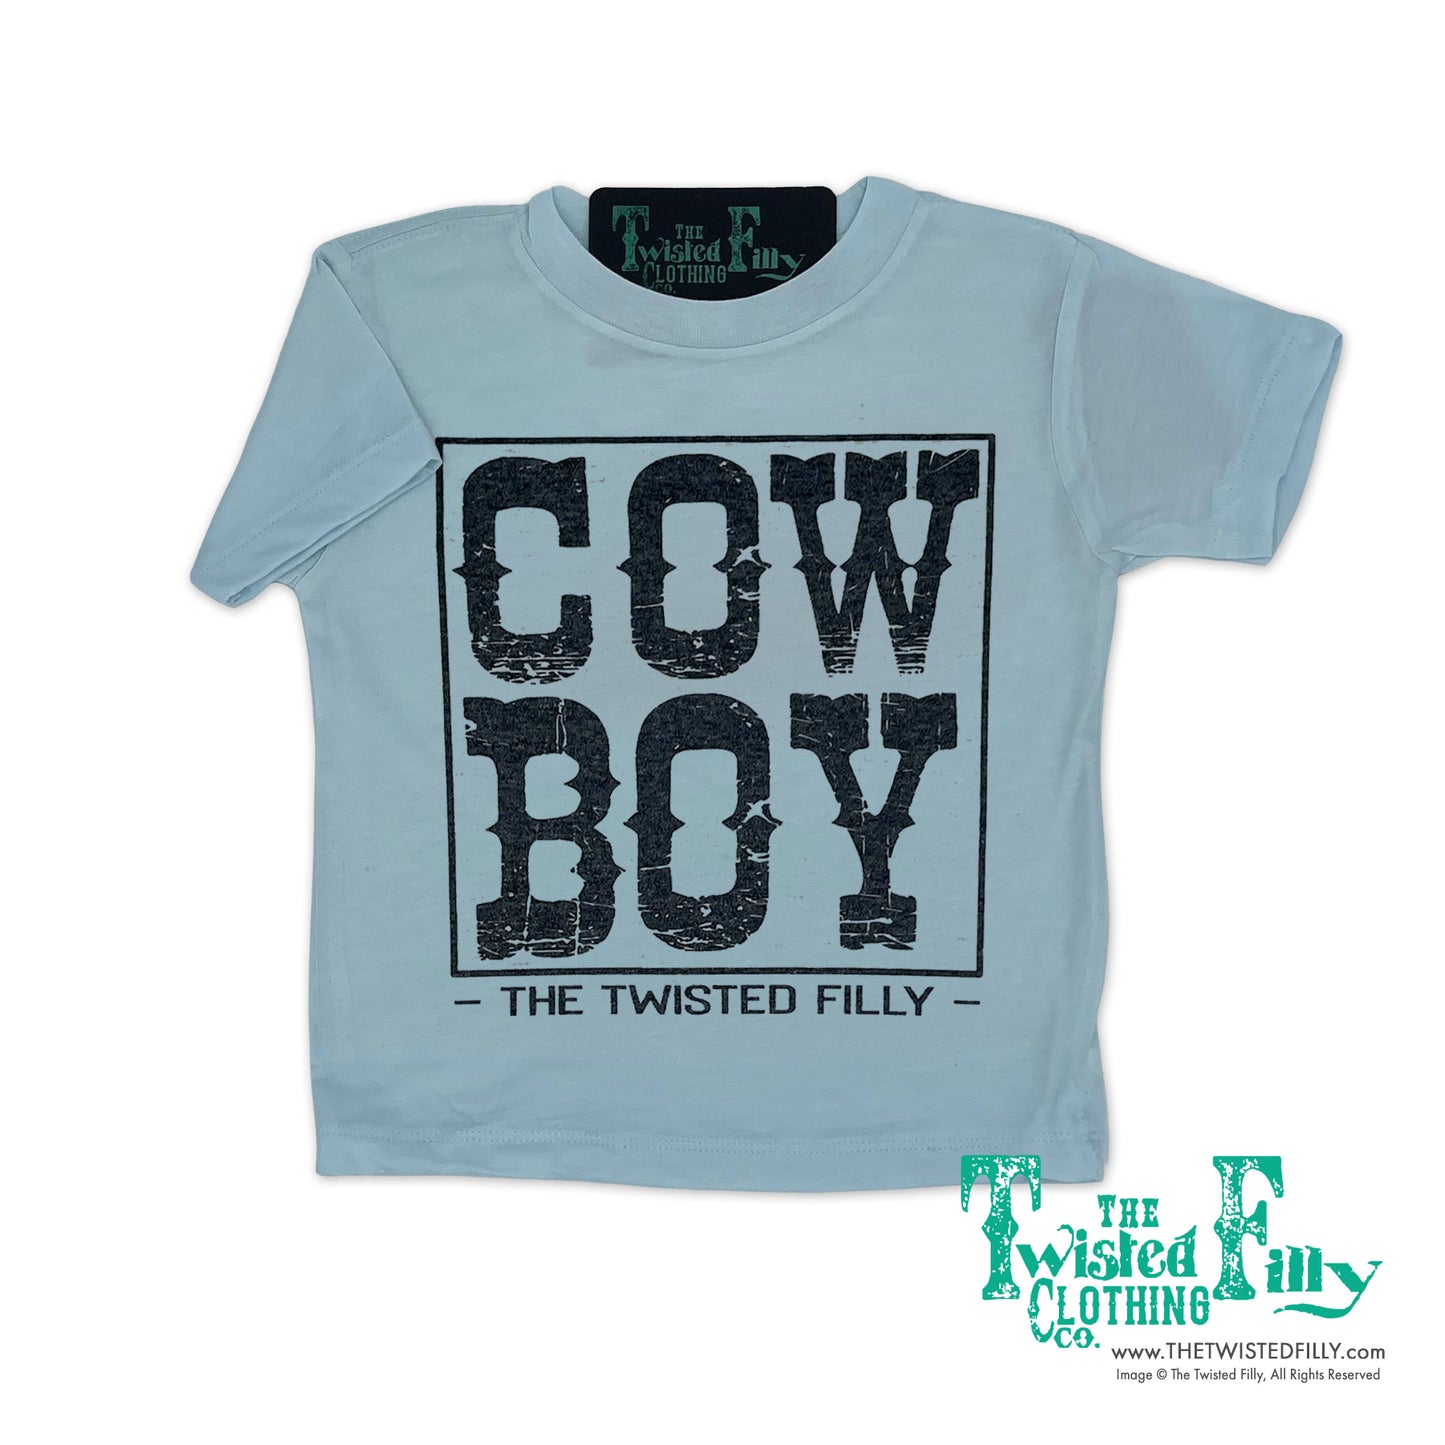 Cow Boy - S/S Infant Tee - Assorted Colors